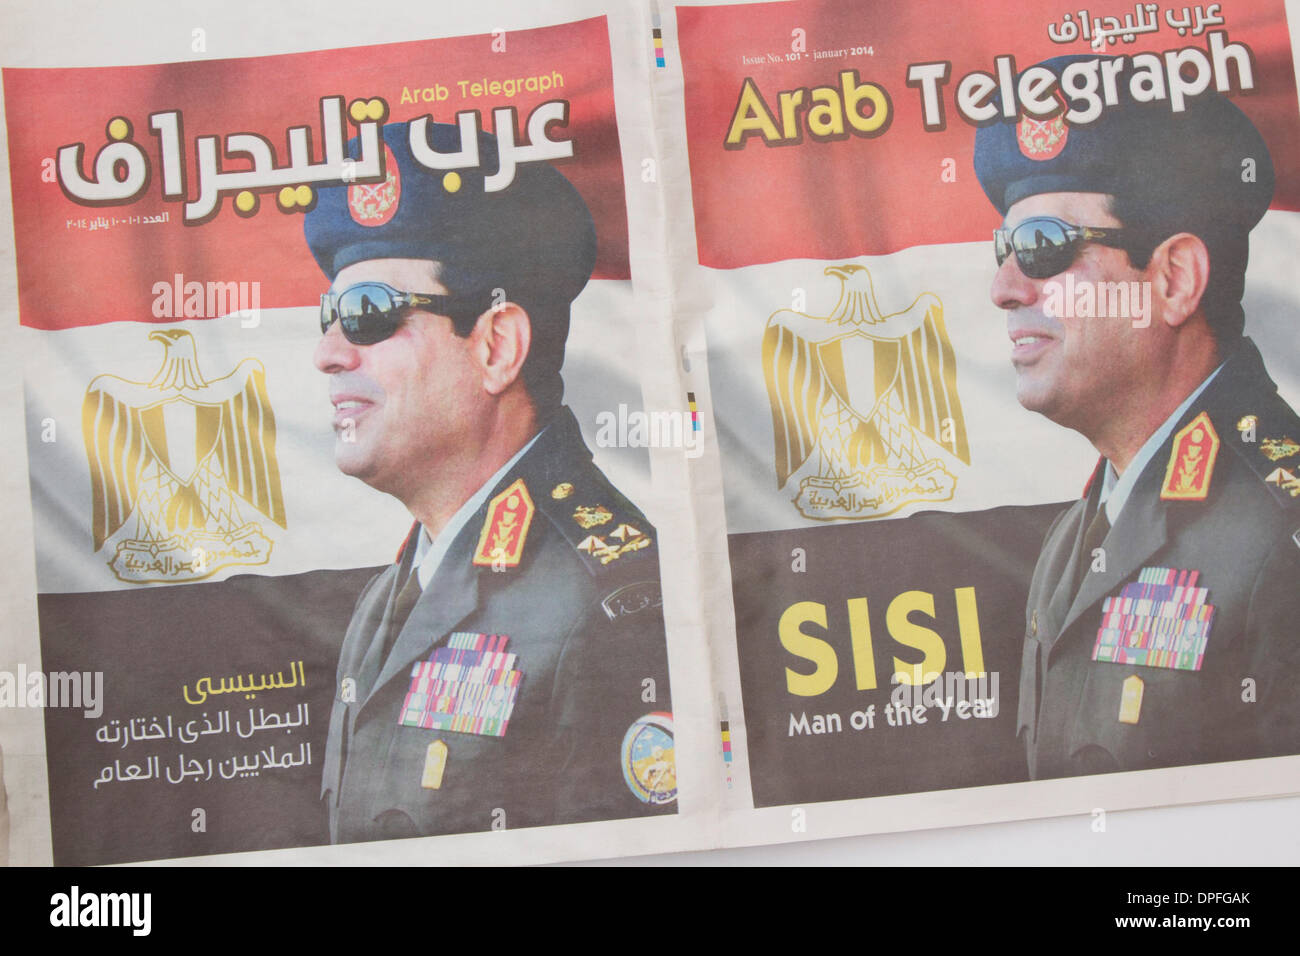 London UK. 14th January 2014. A newspaper front page of General Sisi commander in chief of Egyptian armed forces who played a major part in the court that ousted President Morsi as Egyptians go to the polls to vote on a new constitution Credit:  amer ghazzal/Alamy Live News Stock Photo